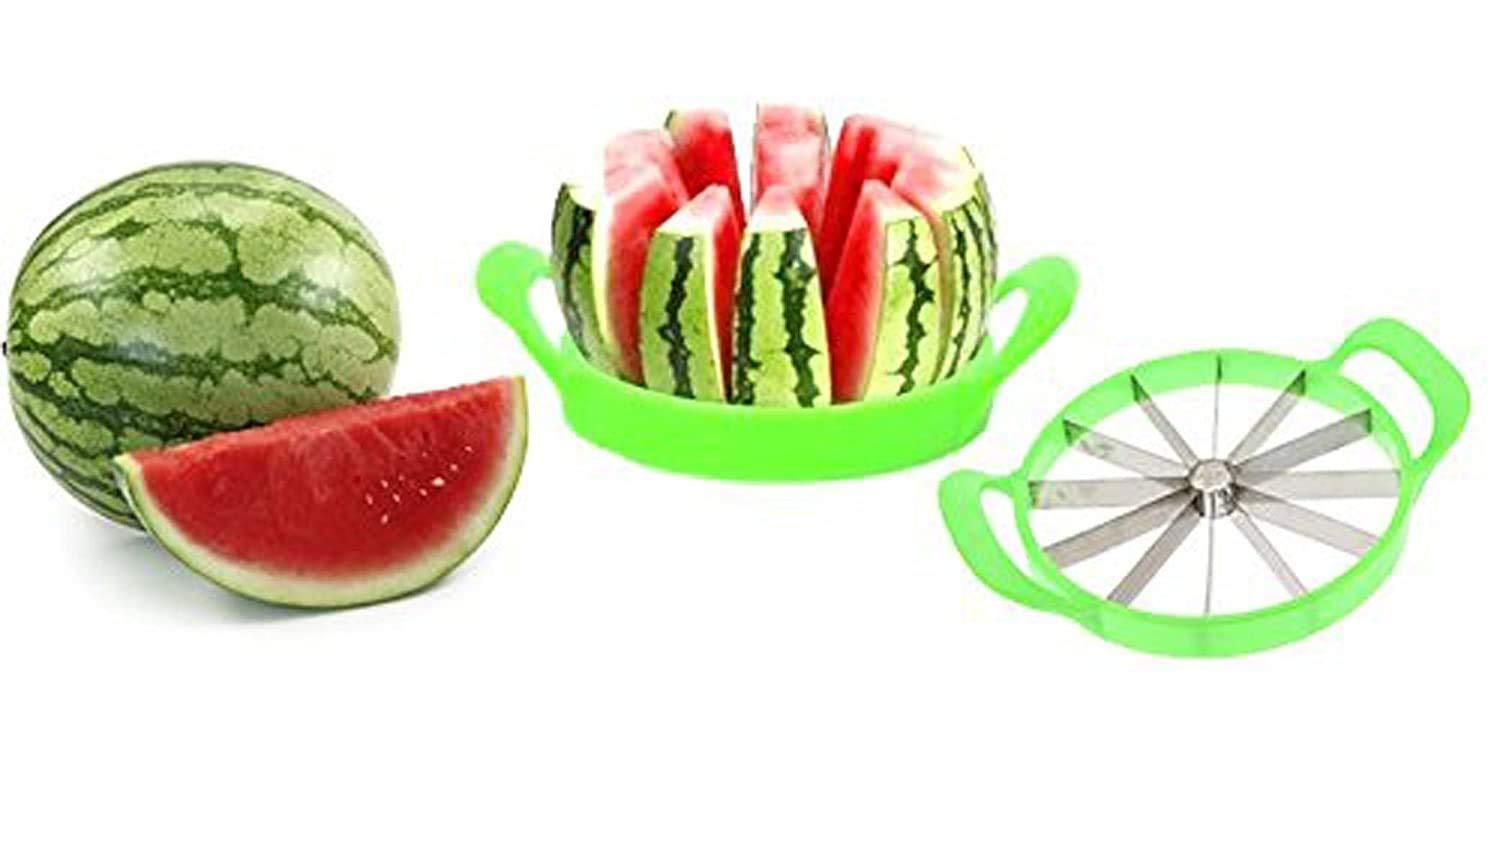 0848 Premium Watermelon Slicer/Cutter with Large Stainless Steel Blades - SkyShopy